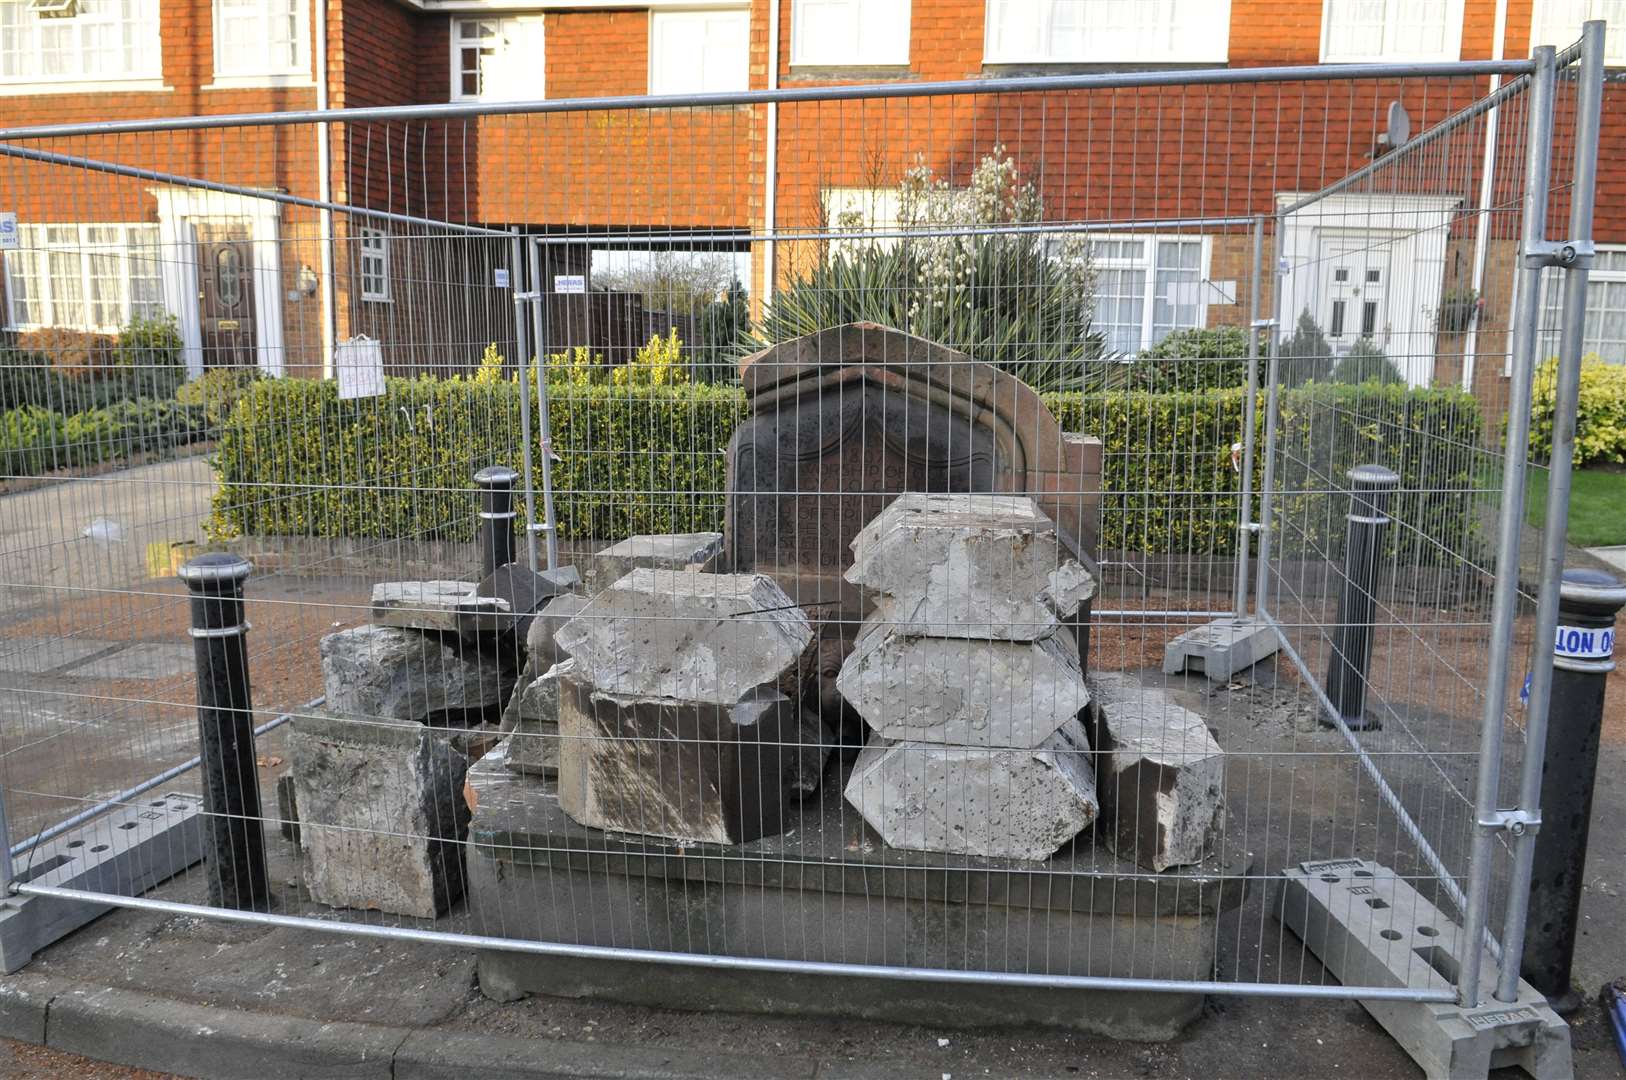 The village water fountain was destroyed in 2008